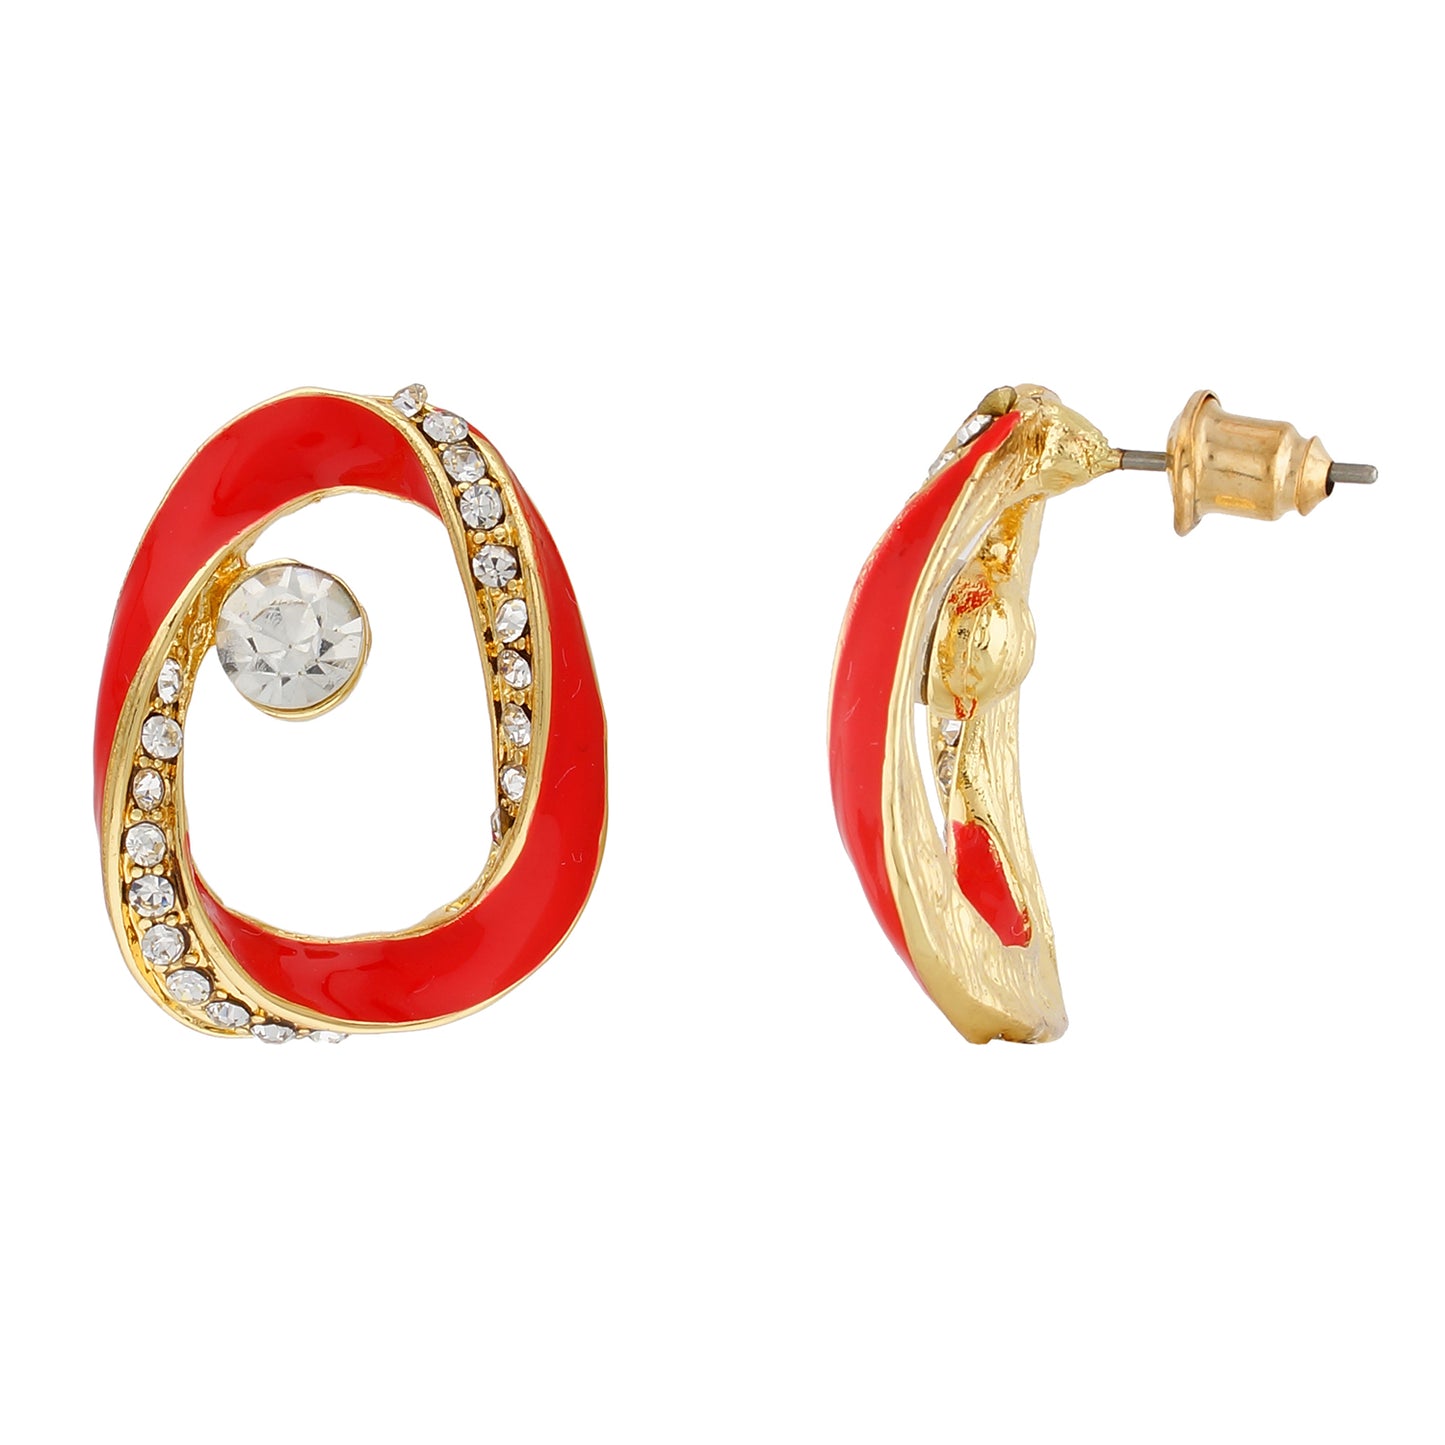 Contemporary Red and Gold Colour Oval Design Enamel Enhanced Earring for Girls and Women